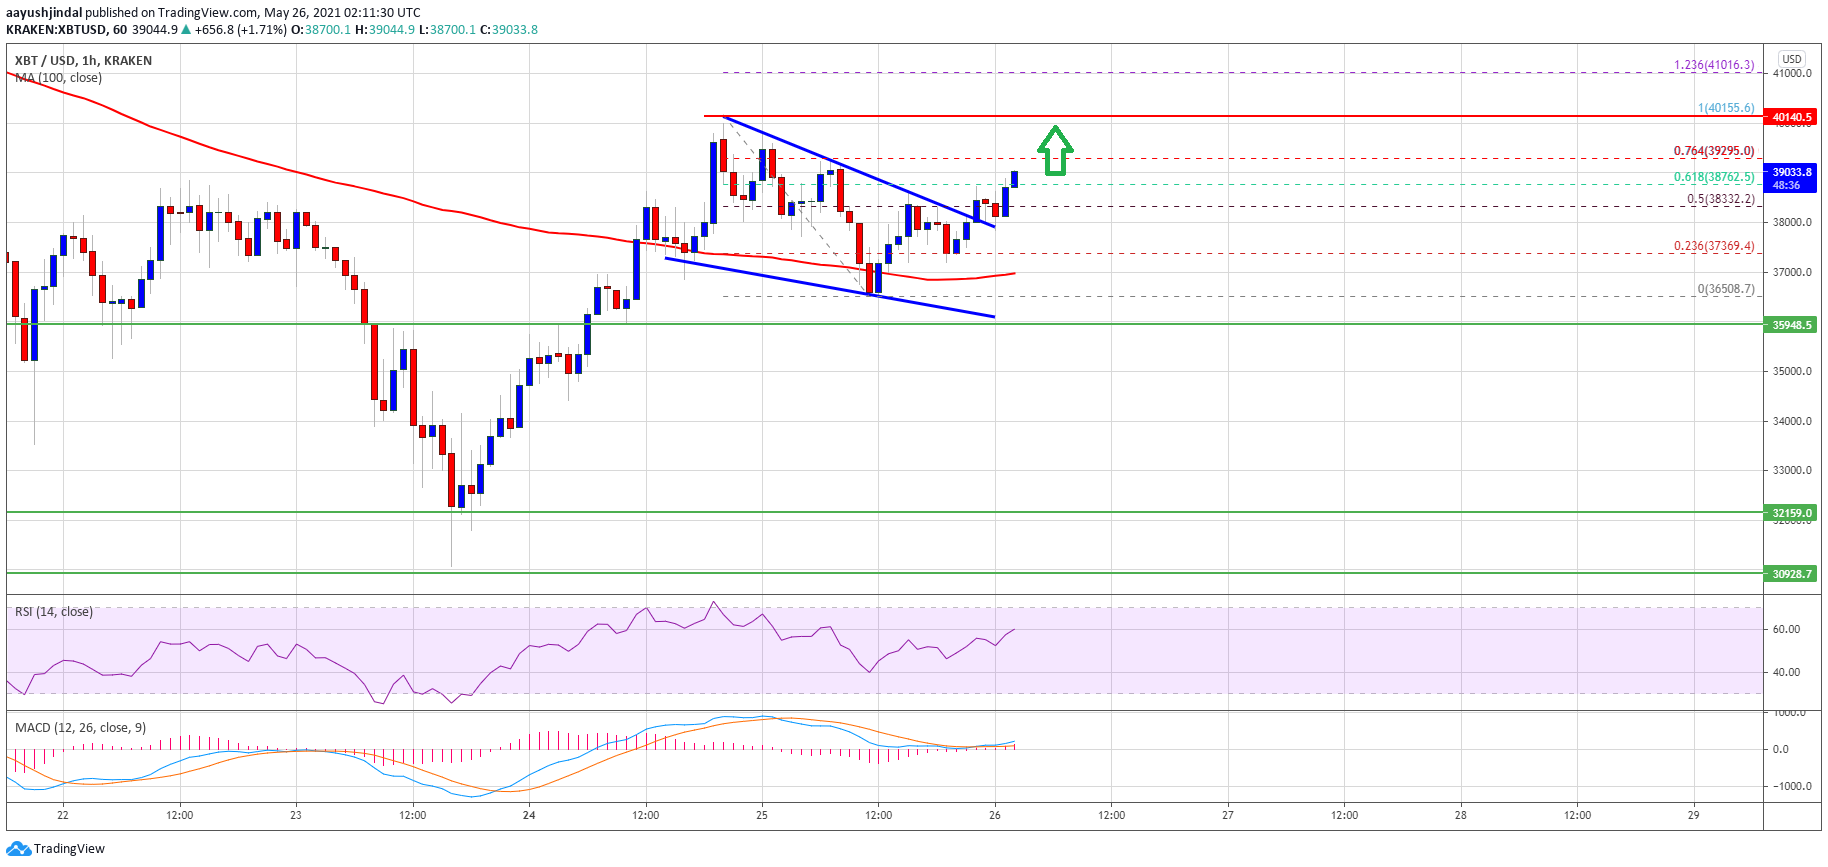 Bitcoin TA: Technical Breakout Suggests BTC Could Rally Above $40K